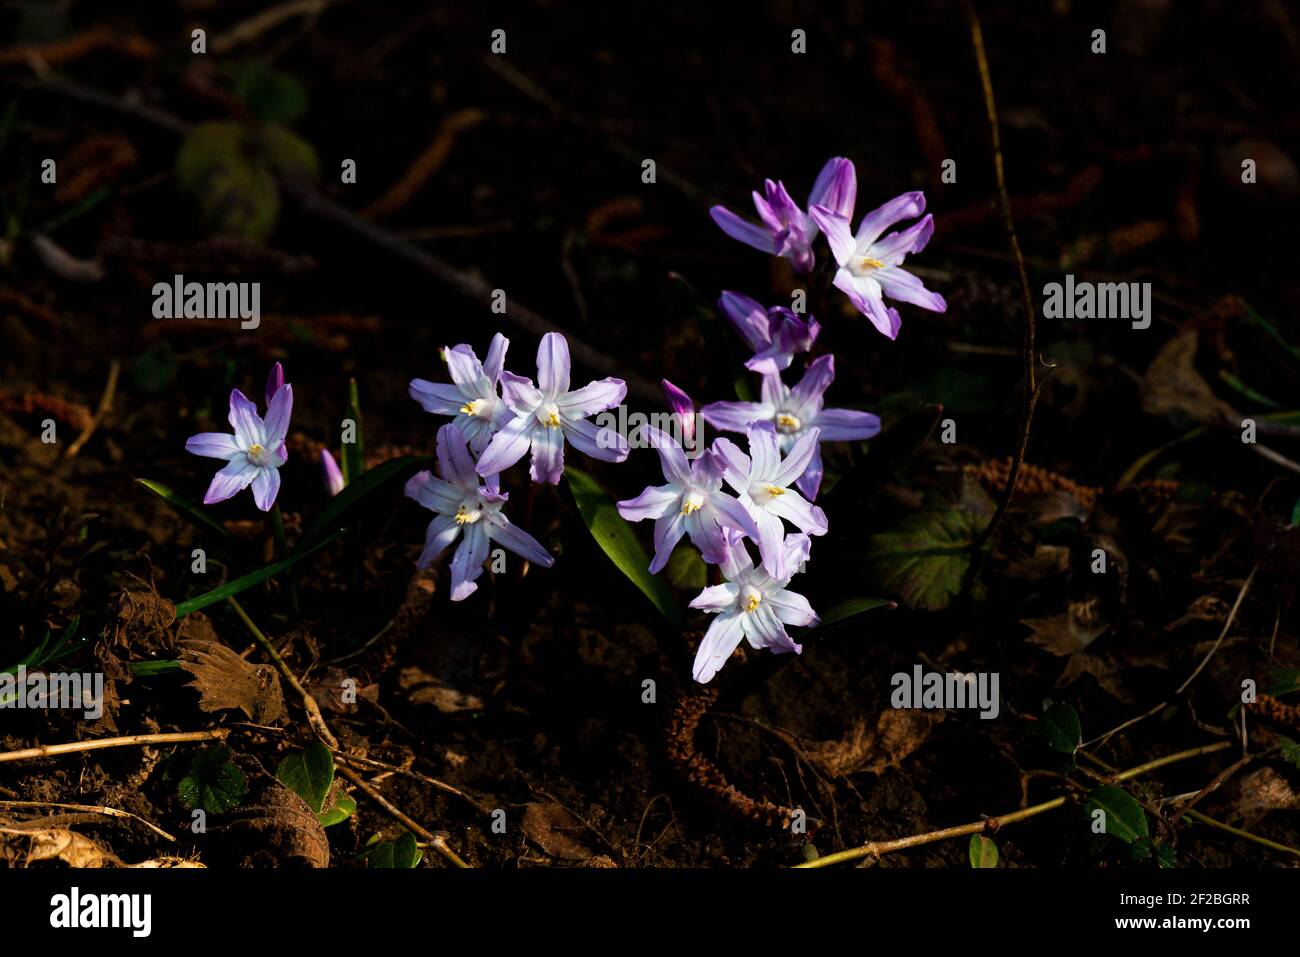 The flowers of squill 'Pink Giant' (Scilla 'Pink Giant') Stock Photo